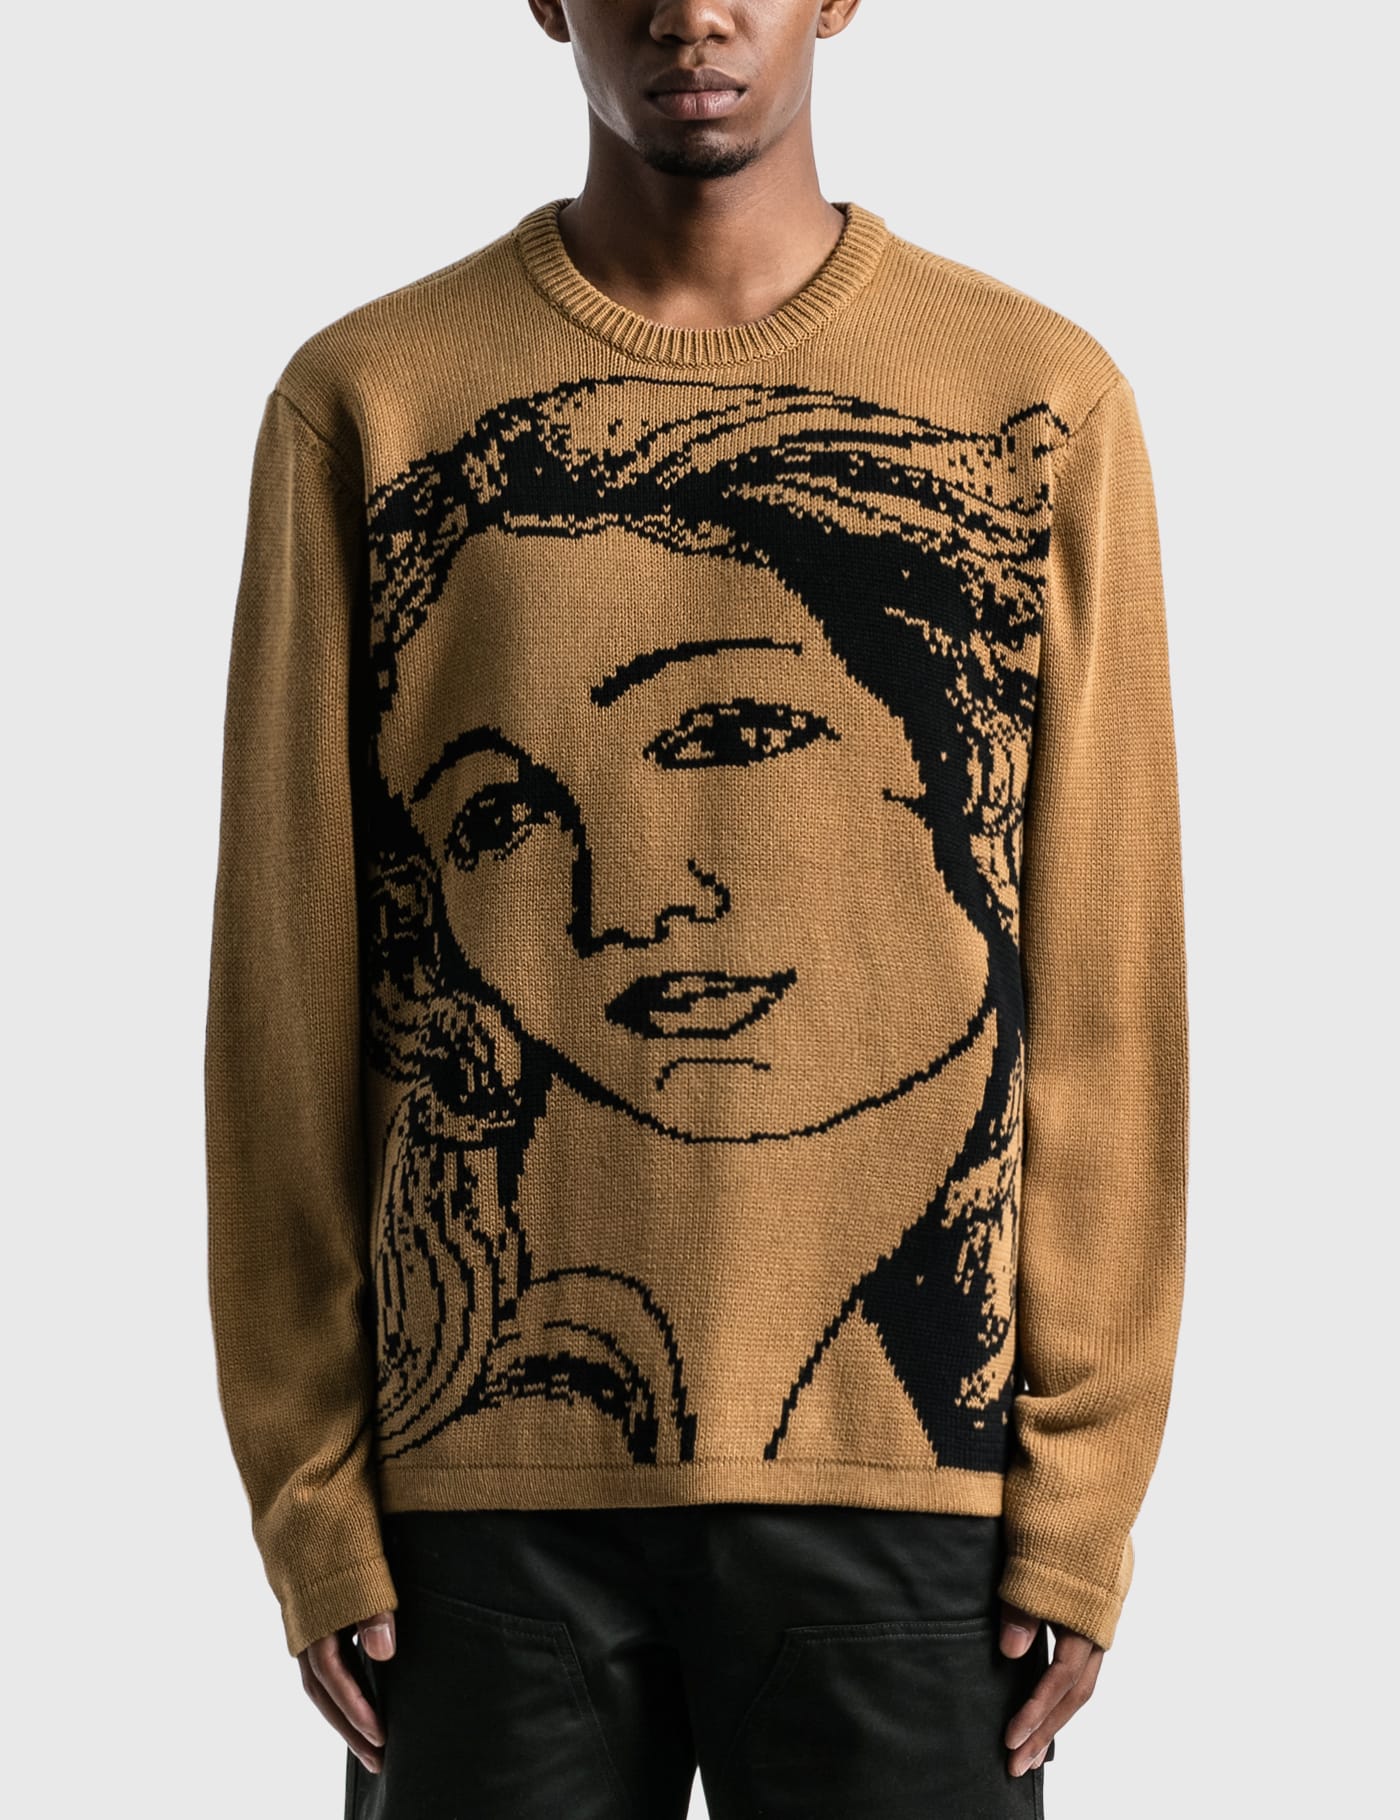 Stüssy - Venus Sweater | HBX - Globally Curated Fashion and